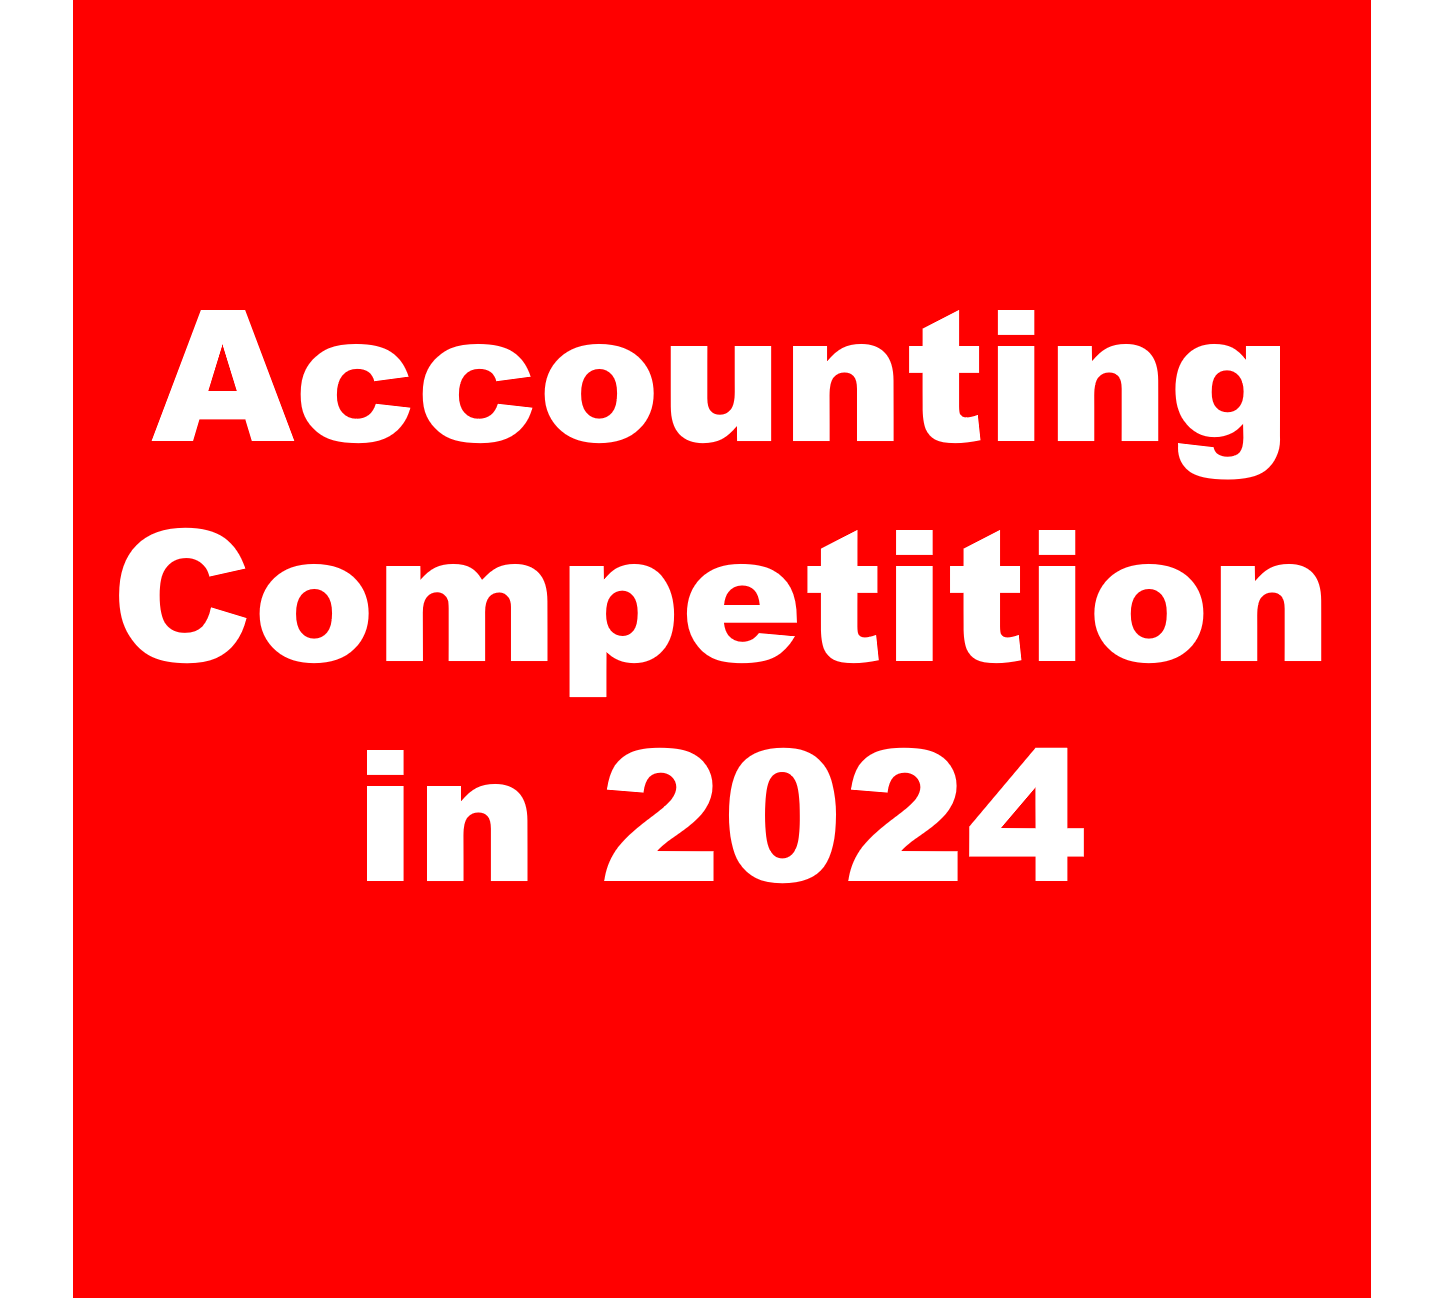 Accounting Competition in 2024